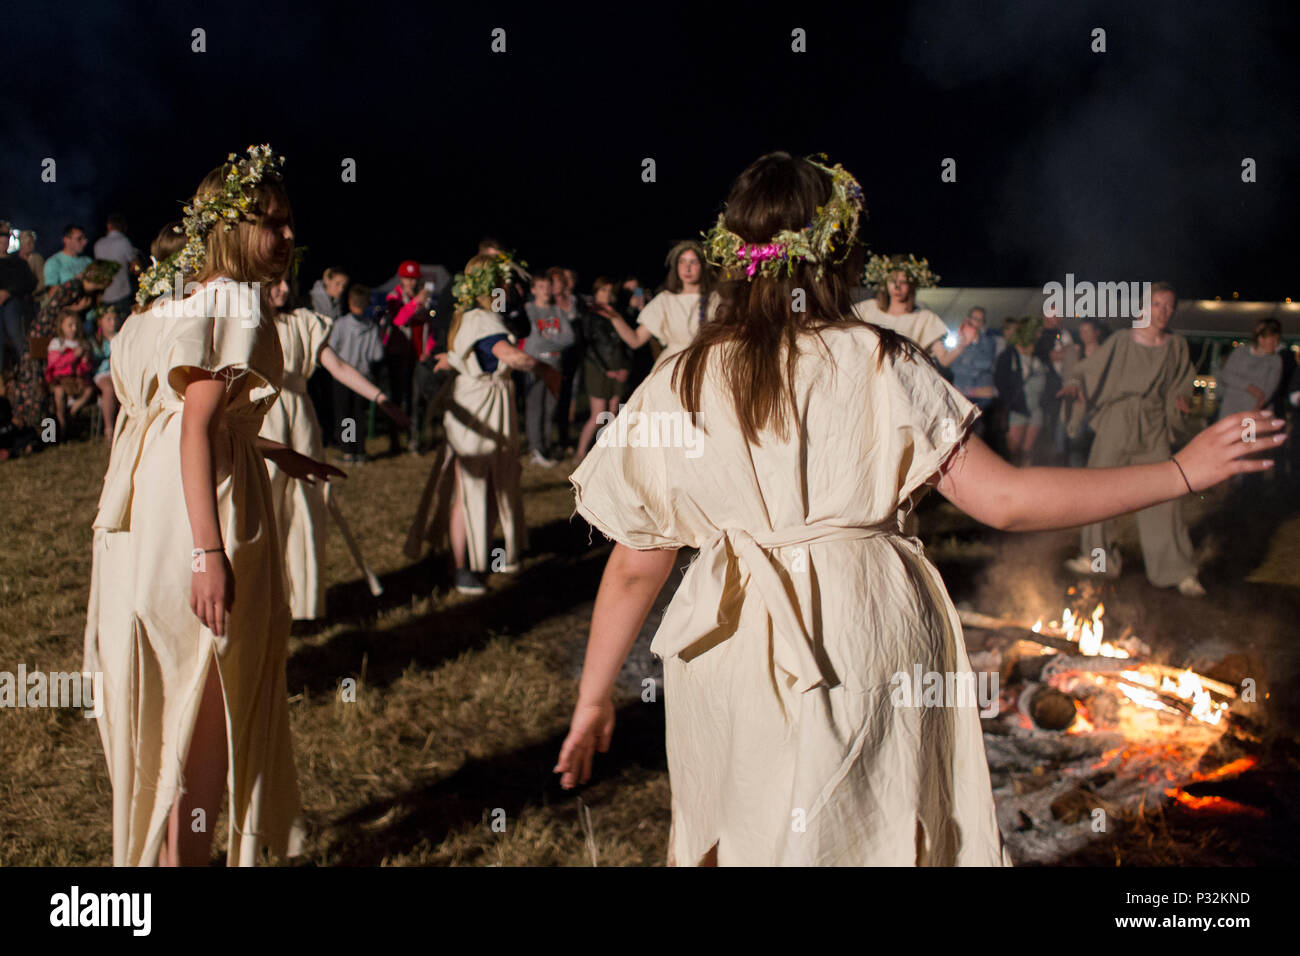 Pakszyn, Poland. 16th June 2018. Kupala Night - a Slavic holiday associated with the summer solstice of the Sun, celebrated during the shortest night of the year. Feast of fire, water, sun and moon, fertility, fertility, joy and love, commonly celebrated in areas inhabited by Slavic peoples, but also in a similar manner in areas inhabited by the Baltic, Germanic and Celtic peoples. Credit: Slawomir Kowalewski/Alamy Live News Stock Photo